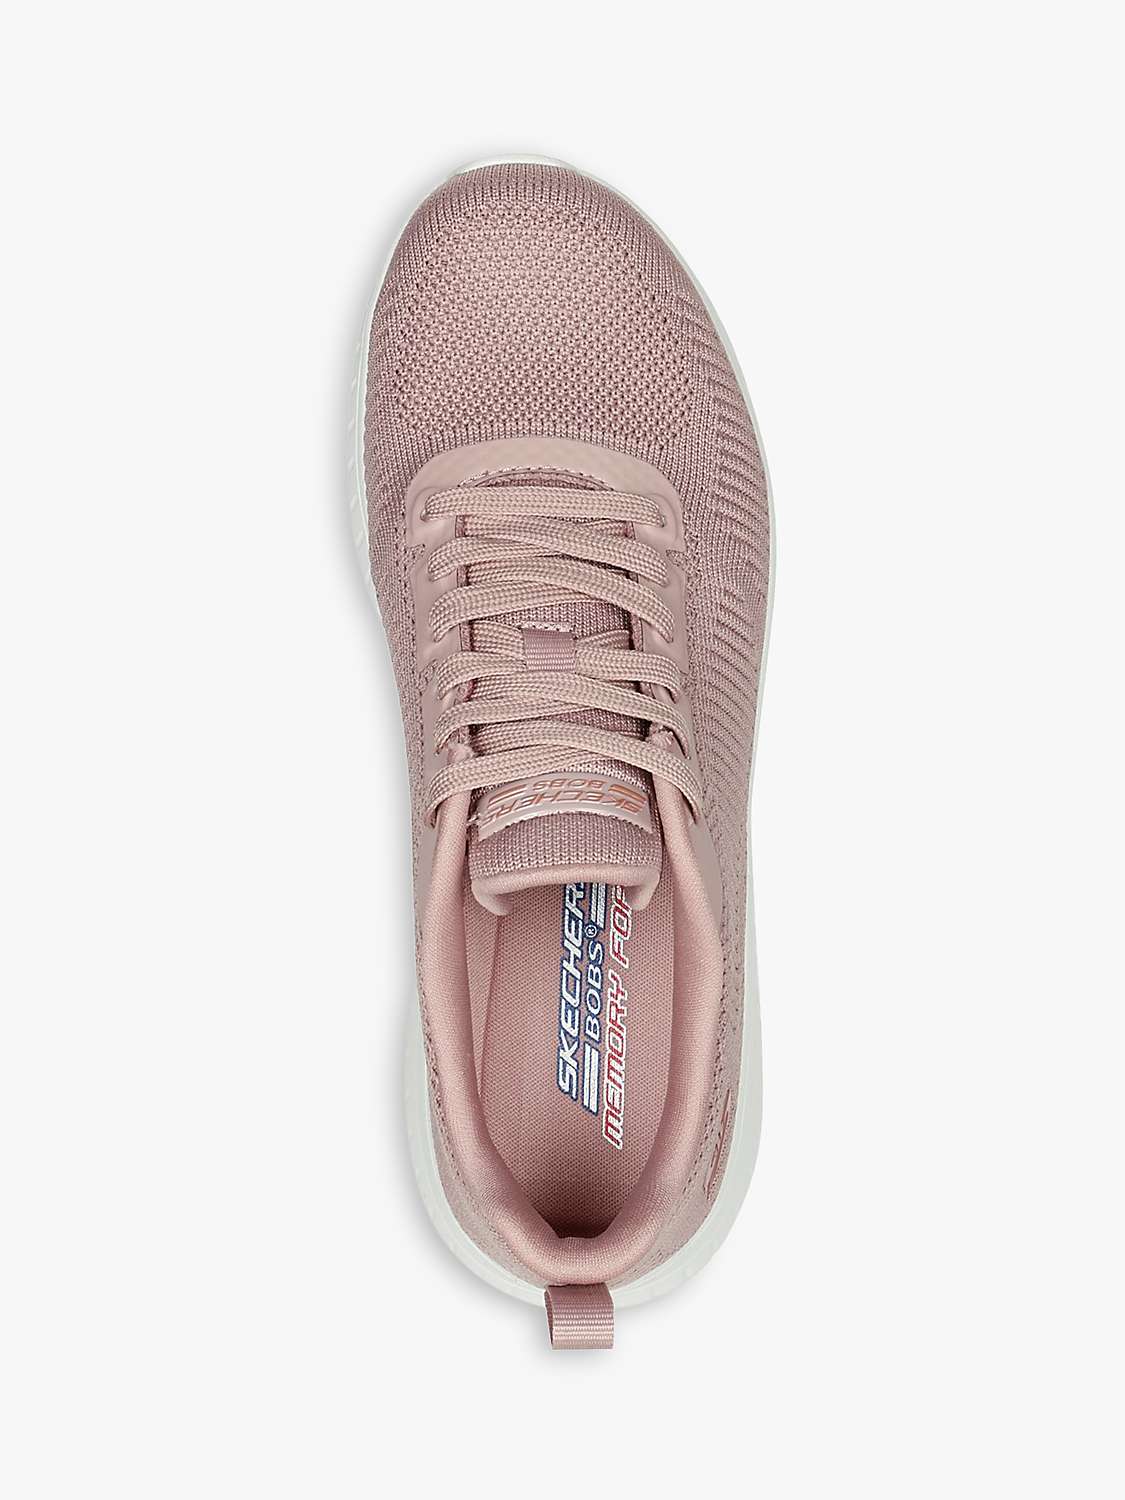 Buy Skechers Bob Squad Chaos Face Off Trainers, Pink Online at johnlewis.com